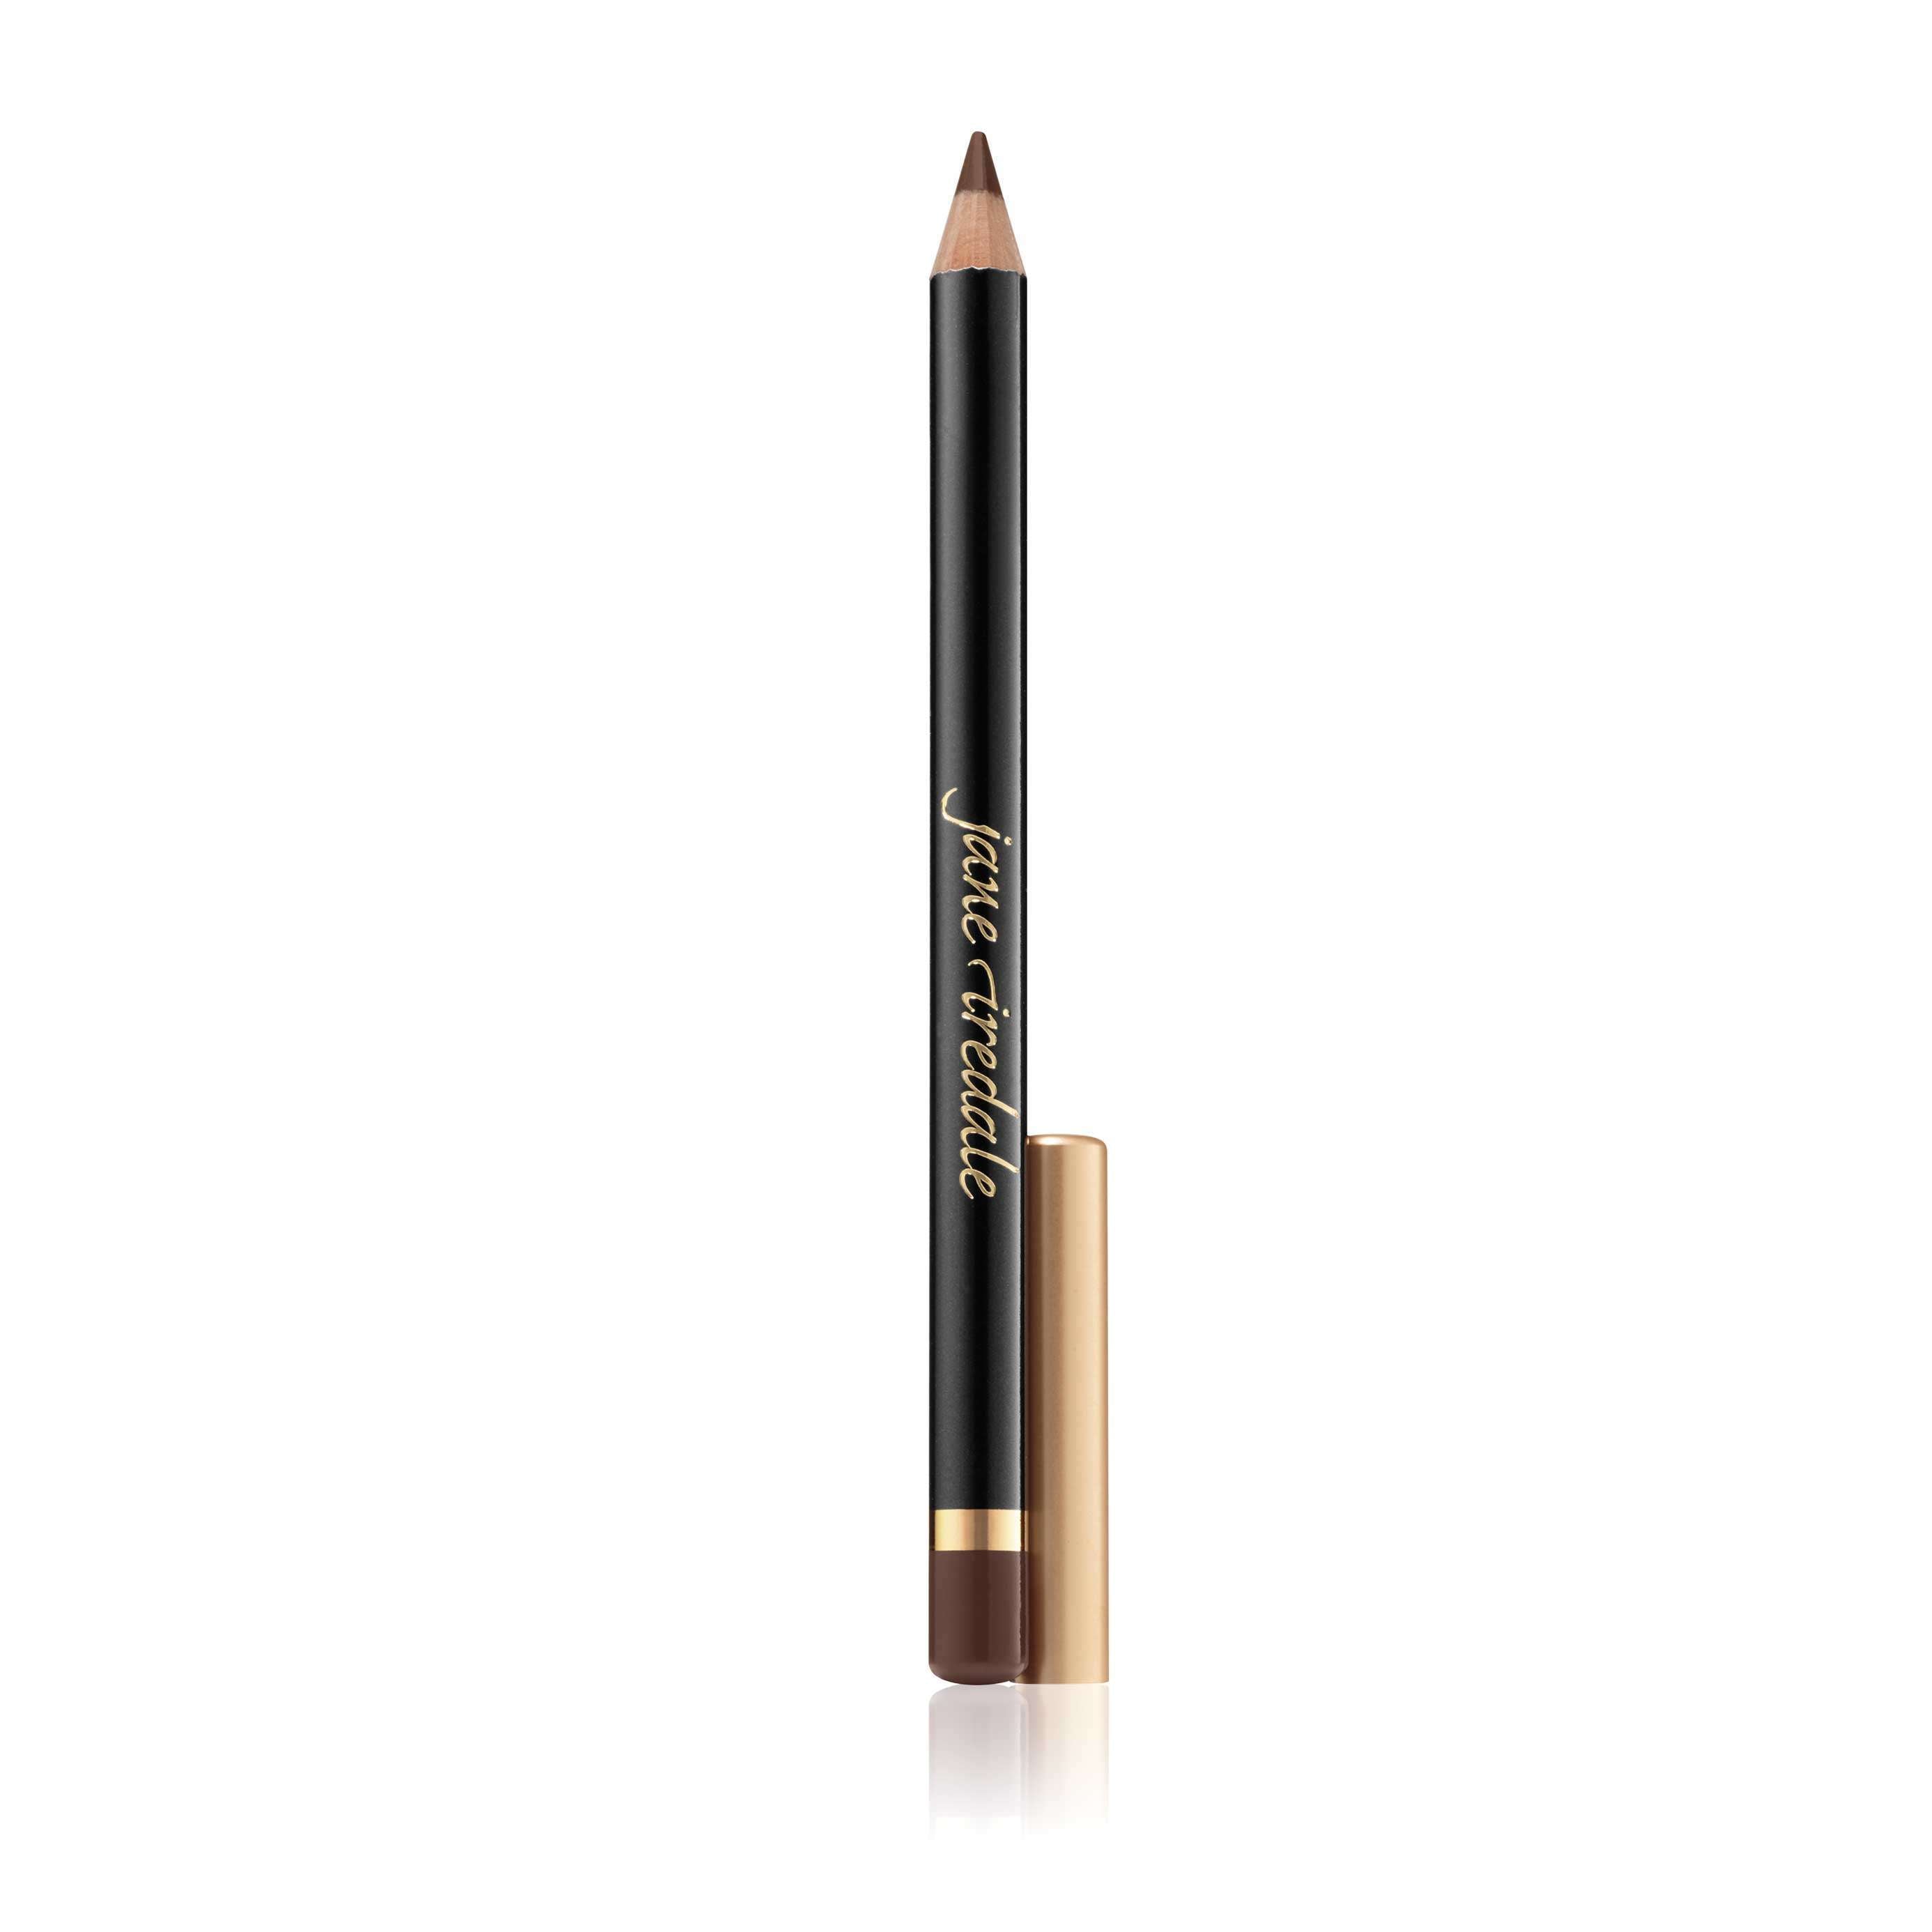 Jane Iredale Eye Pencil at Socialite Beauty Canada